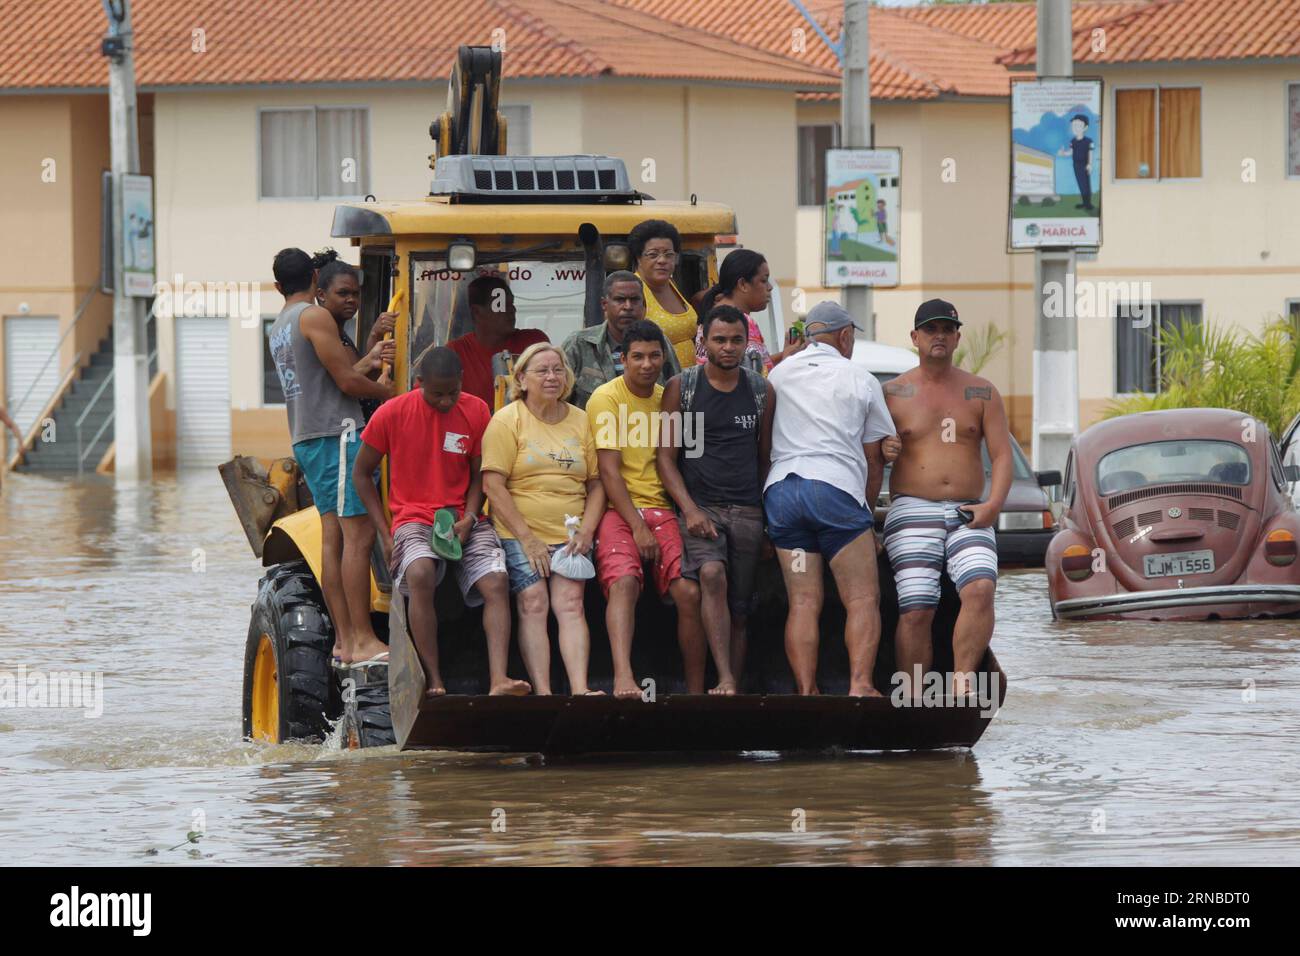 (160302) -- MARICA, March 2, 2016 -- Residents are transported by a bulldozer through flood in Itaipuacu district, Marica city, Rio de Janeiro state, Brazil, on March 2, 2016. Residents in different parts of Itaipuacu district remain stranded after the 24-hour heavy rains. Paulo Campos/AGENCIA ESTADO (jg) (sp) BRAZIL OUT BRAZIL-MARICA-ENVIRONMENT-FLOOD e AE PUBLICATIONxNOTxINxCHN   Marica March 2 2016 Residents are transported by a Bulldozers Through Flood in  District Marica City Rio de Janeiro State Brazil ON March 2 2016 Residents in different Parts of  District Remain stranded After The 24 Stock Photo